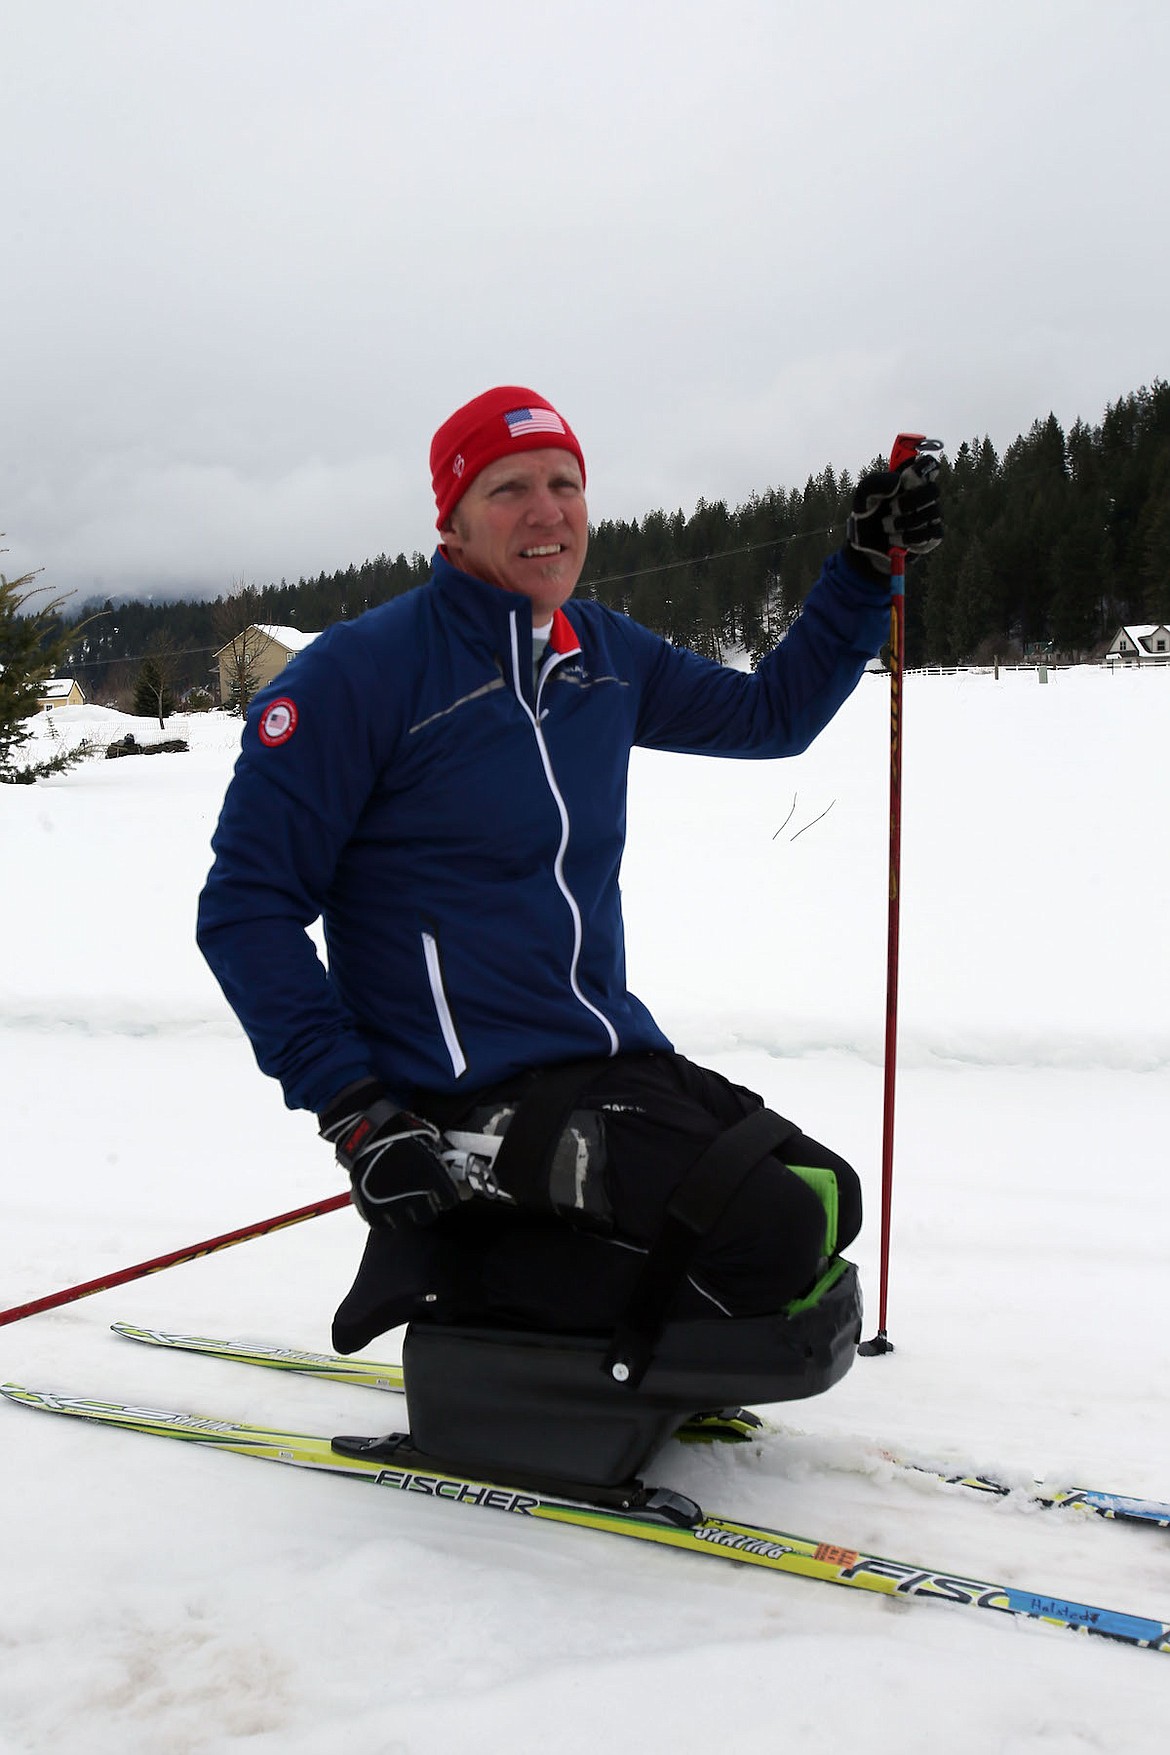 Rathdrum resident Sean Halsted will represent the Stars and Stripes at the 2018 Paralympic Winter Games in PyeongChang, South Korea, this month. (JUDD WILSON/Press)